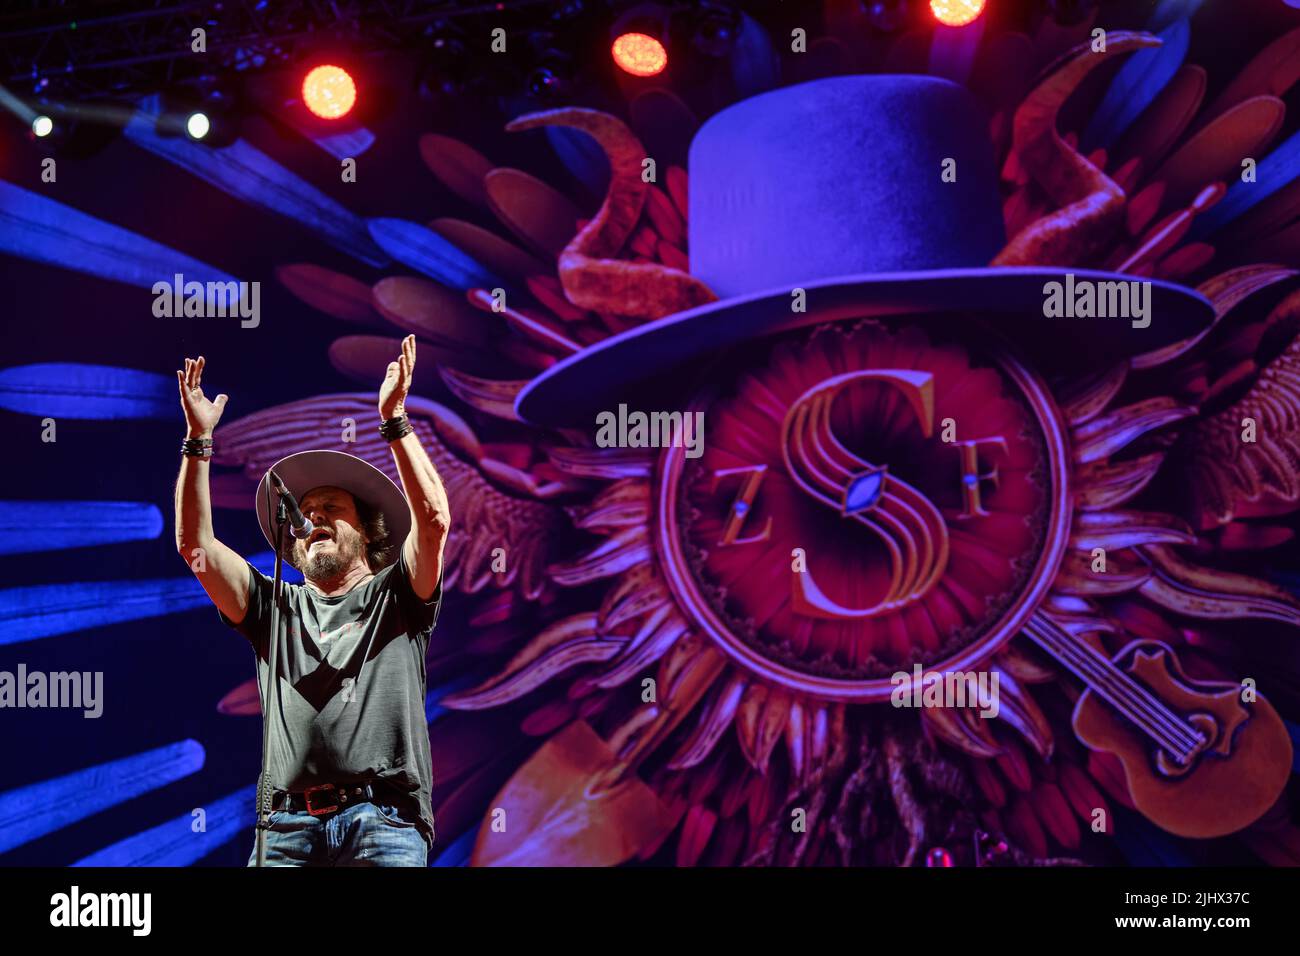 LUCCA, Italy. 20th July, 2022. Zucchero performs in concert in front of thousands of people on the historic city walls of lucca during the lucca summer festival. Credit: Stefano Dalle Luche/Alamy Live News Stock Photo